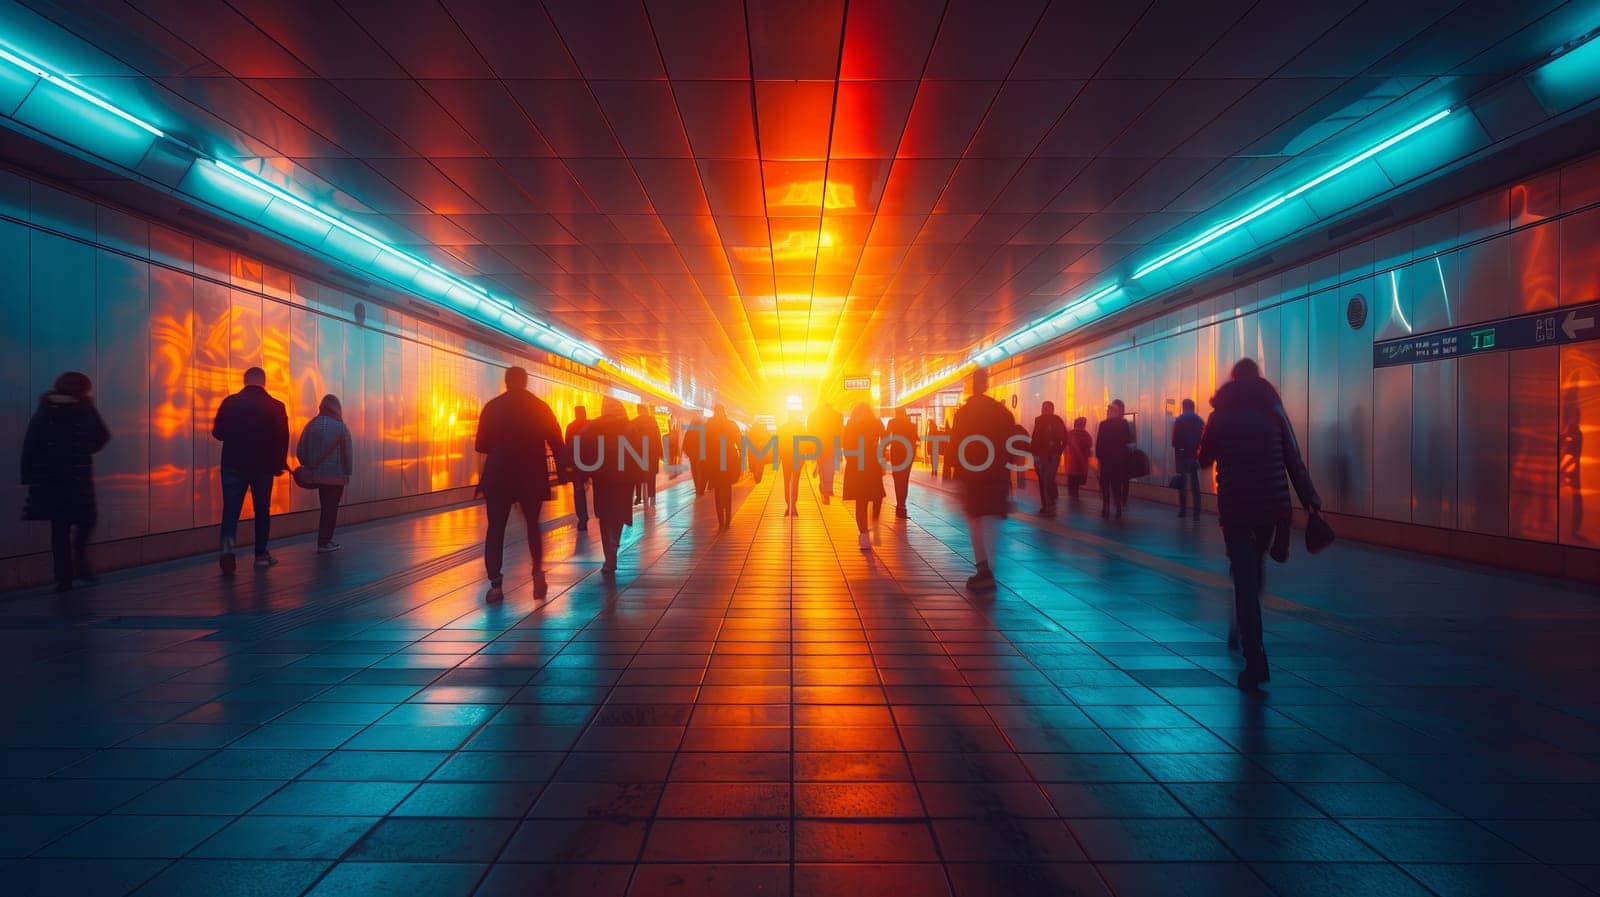 a group of people are walking through a tunnel at night by richwolf